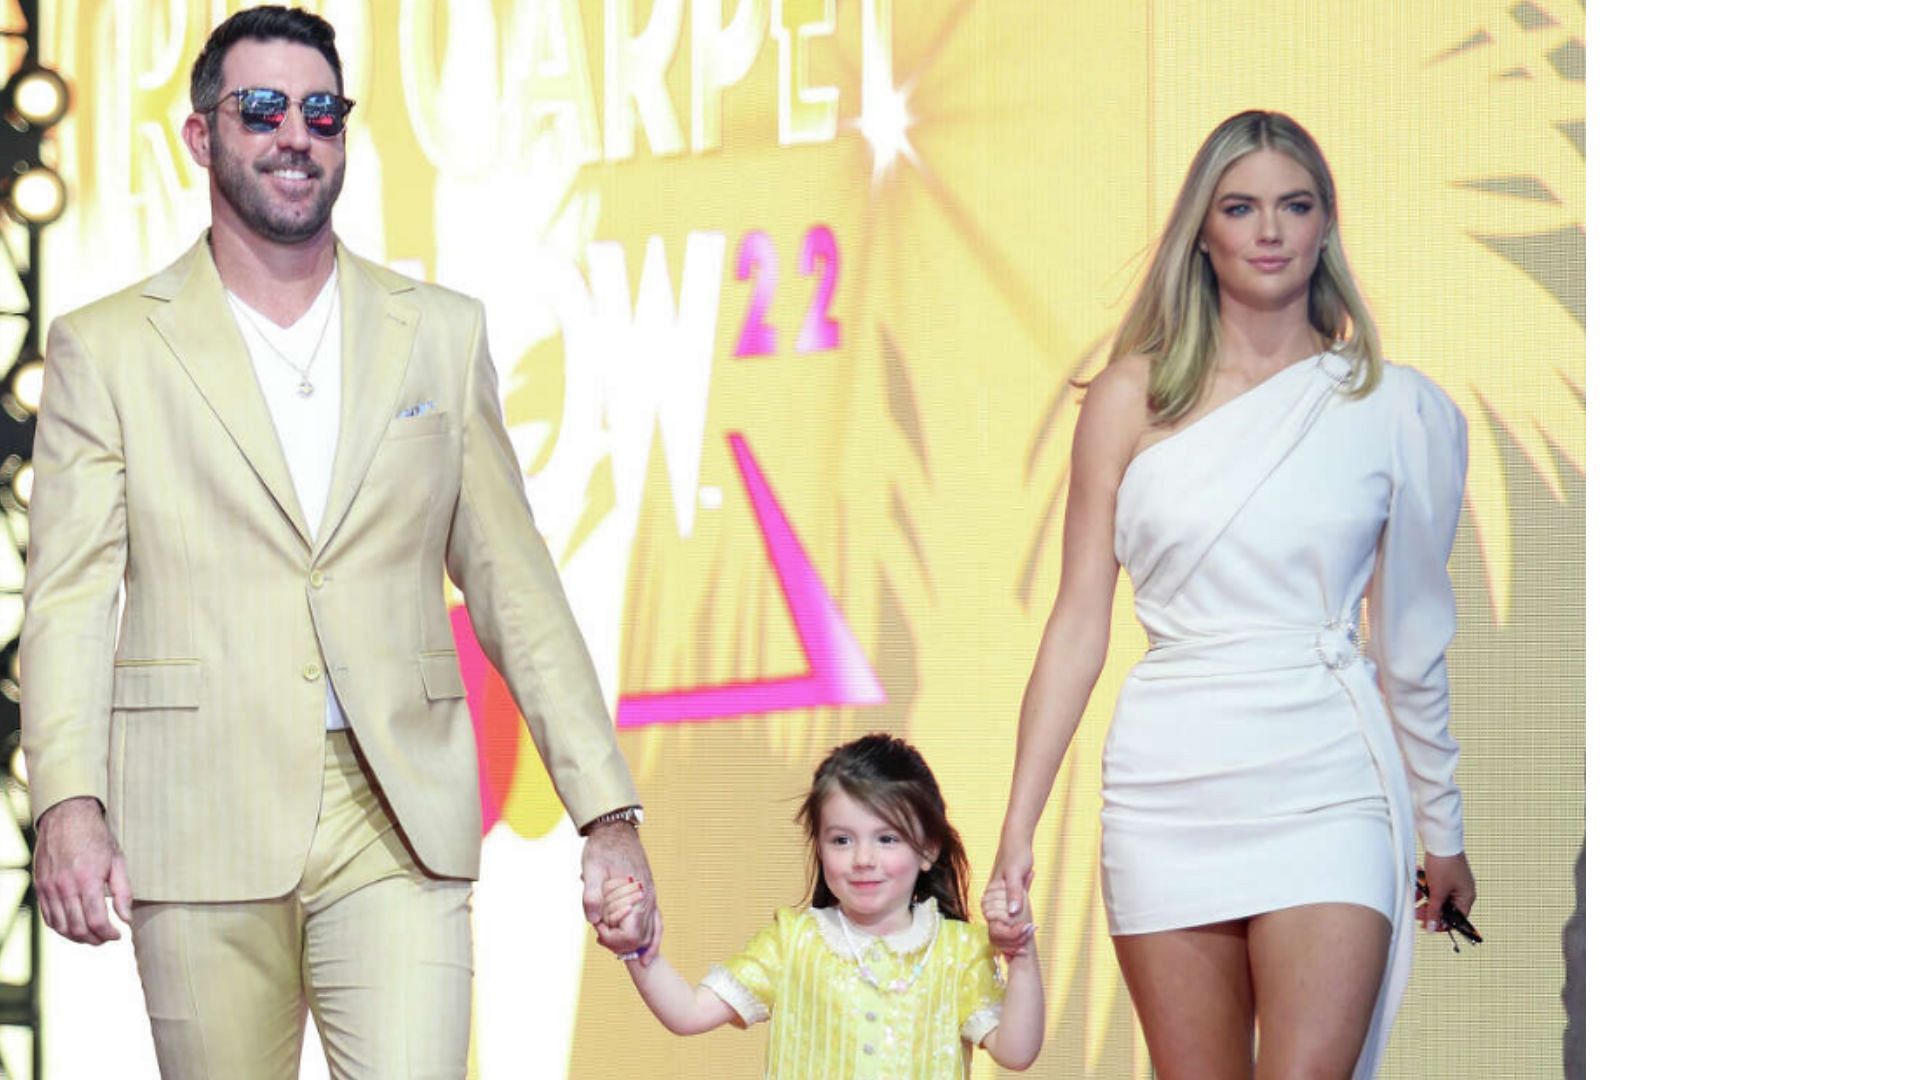 Changed My Life - Kate Upton opens up about raising daughter